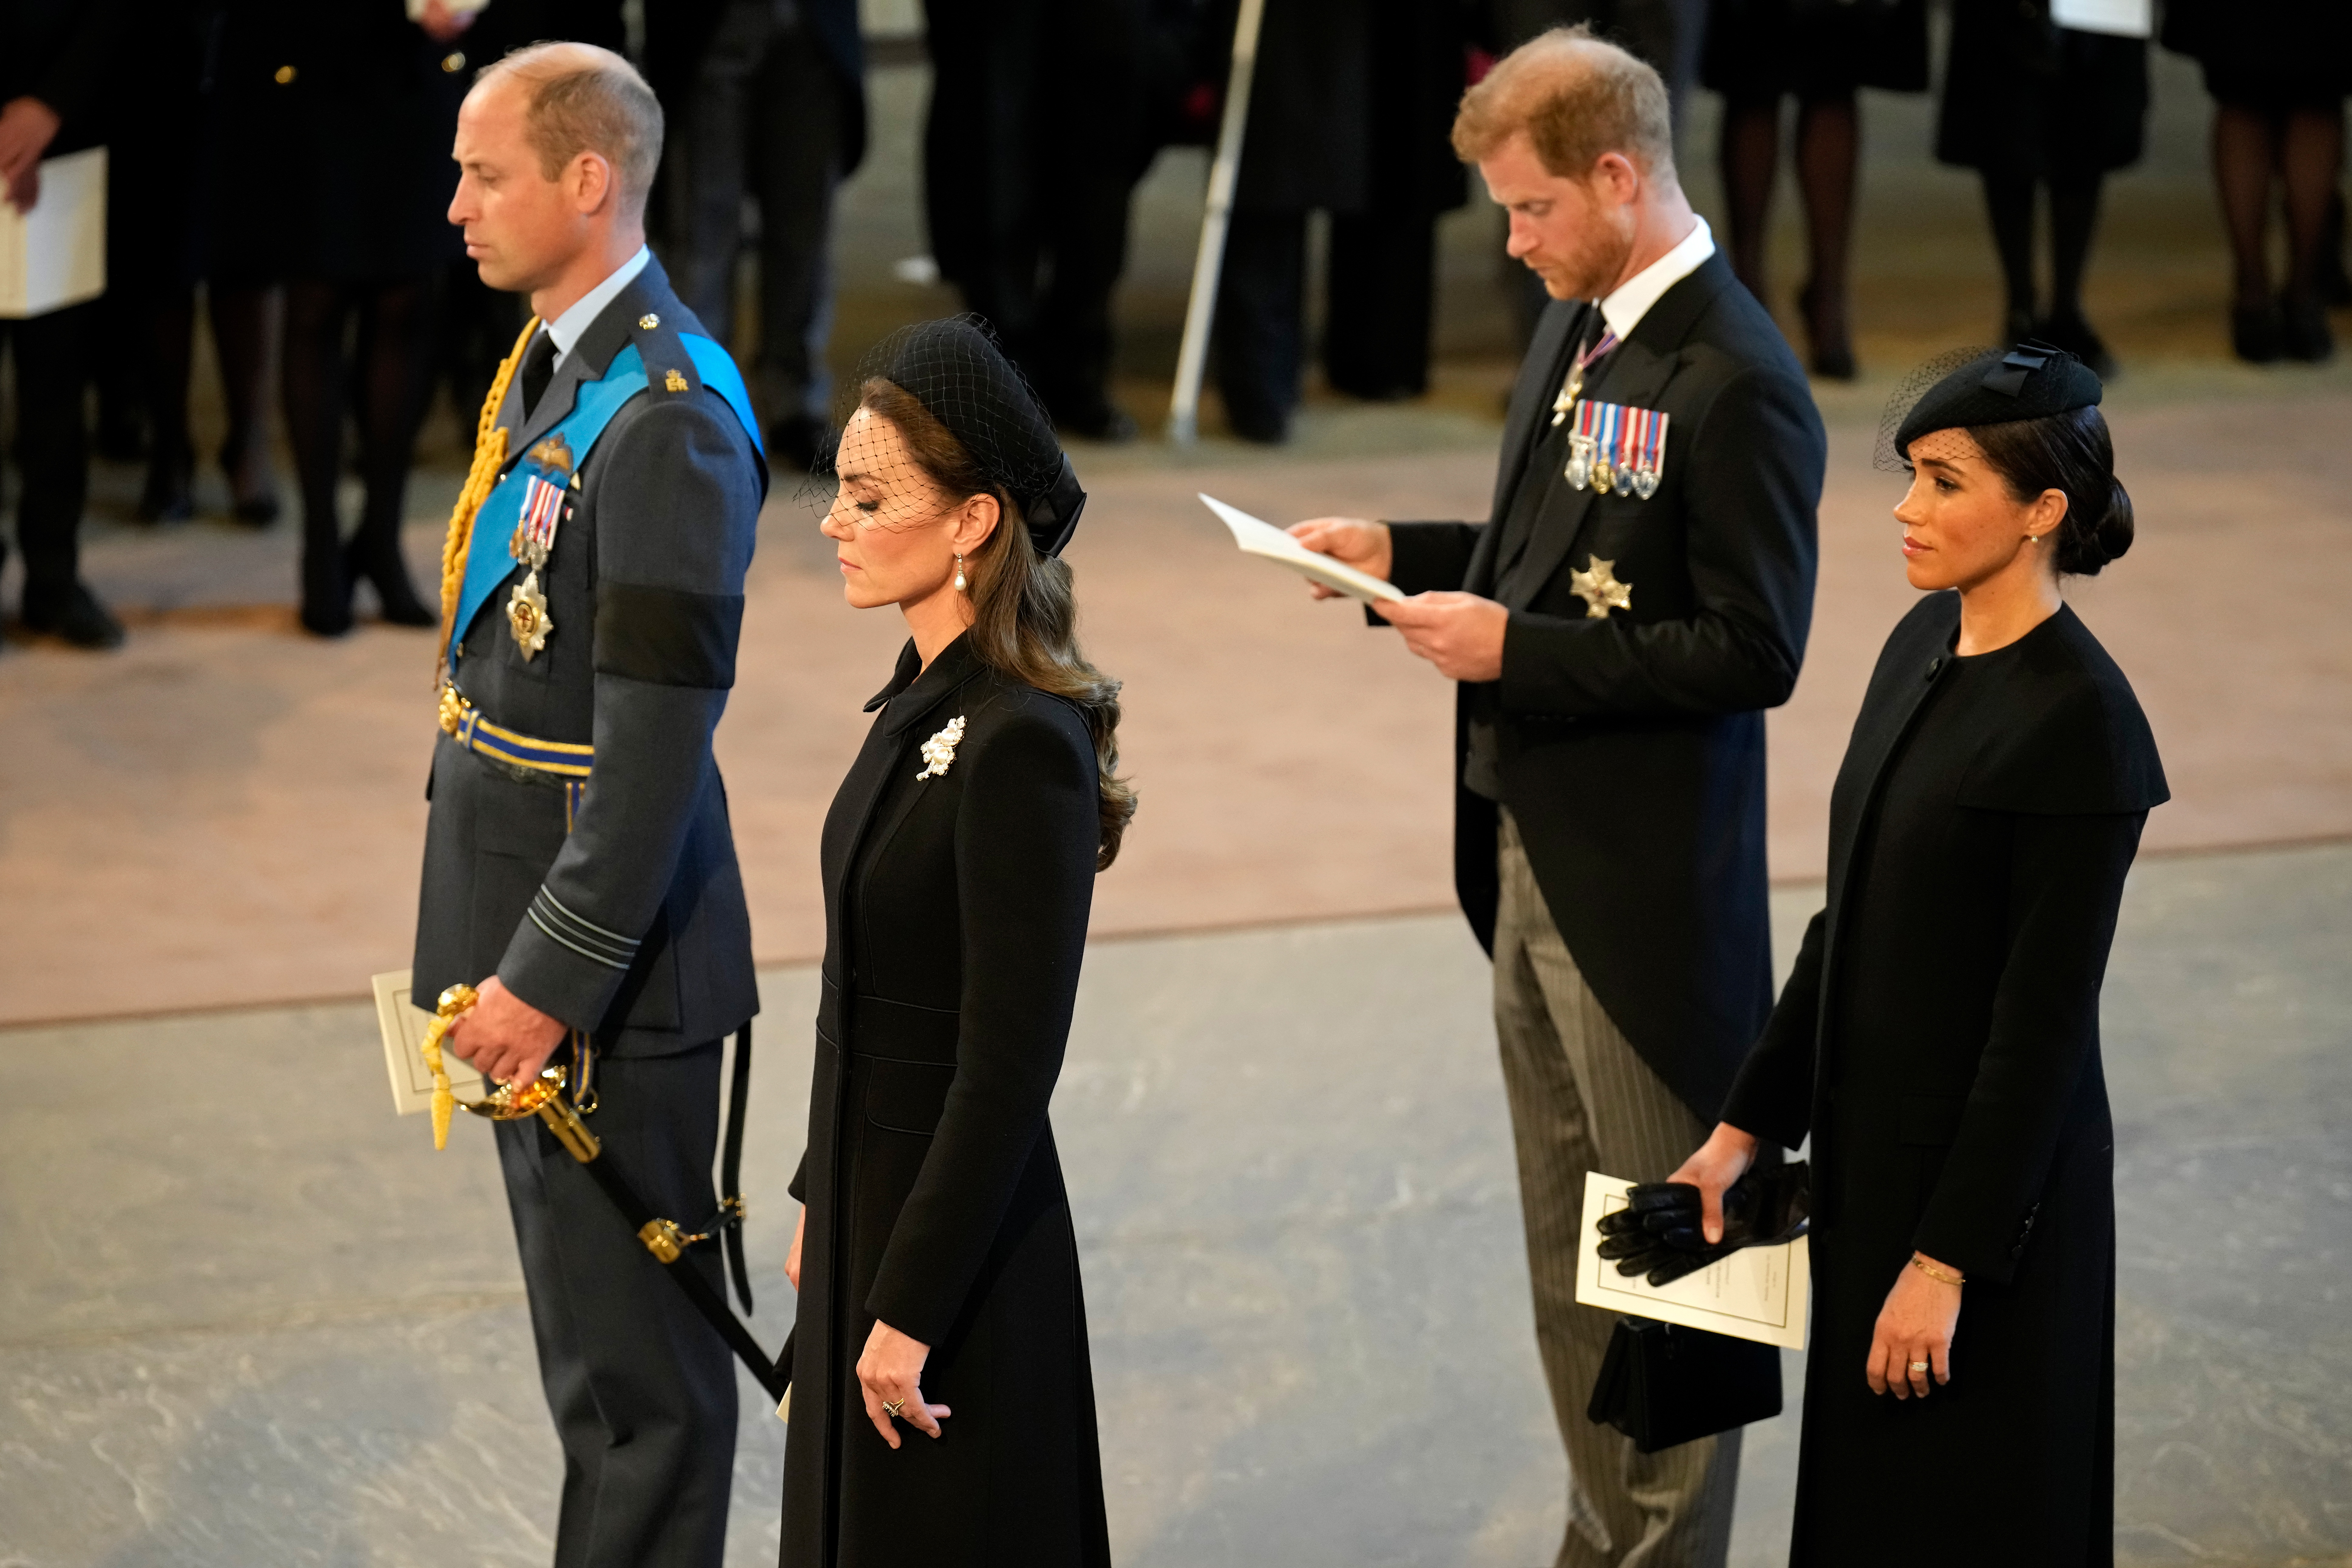 Prince William, Prince of Wales, Catherine, Princess of Wales, Prince Harry, Duke of Sussex and Meghan, Duchess of Sussex during the Lying-in State of Queen Elizabeth II on September 14, 2022 in London, England | Source: Getty Images